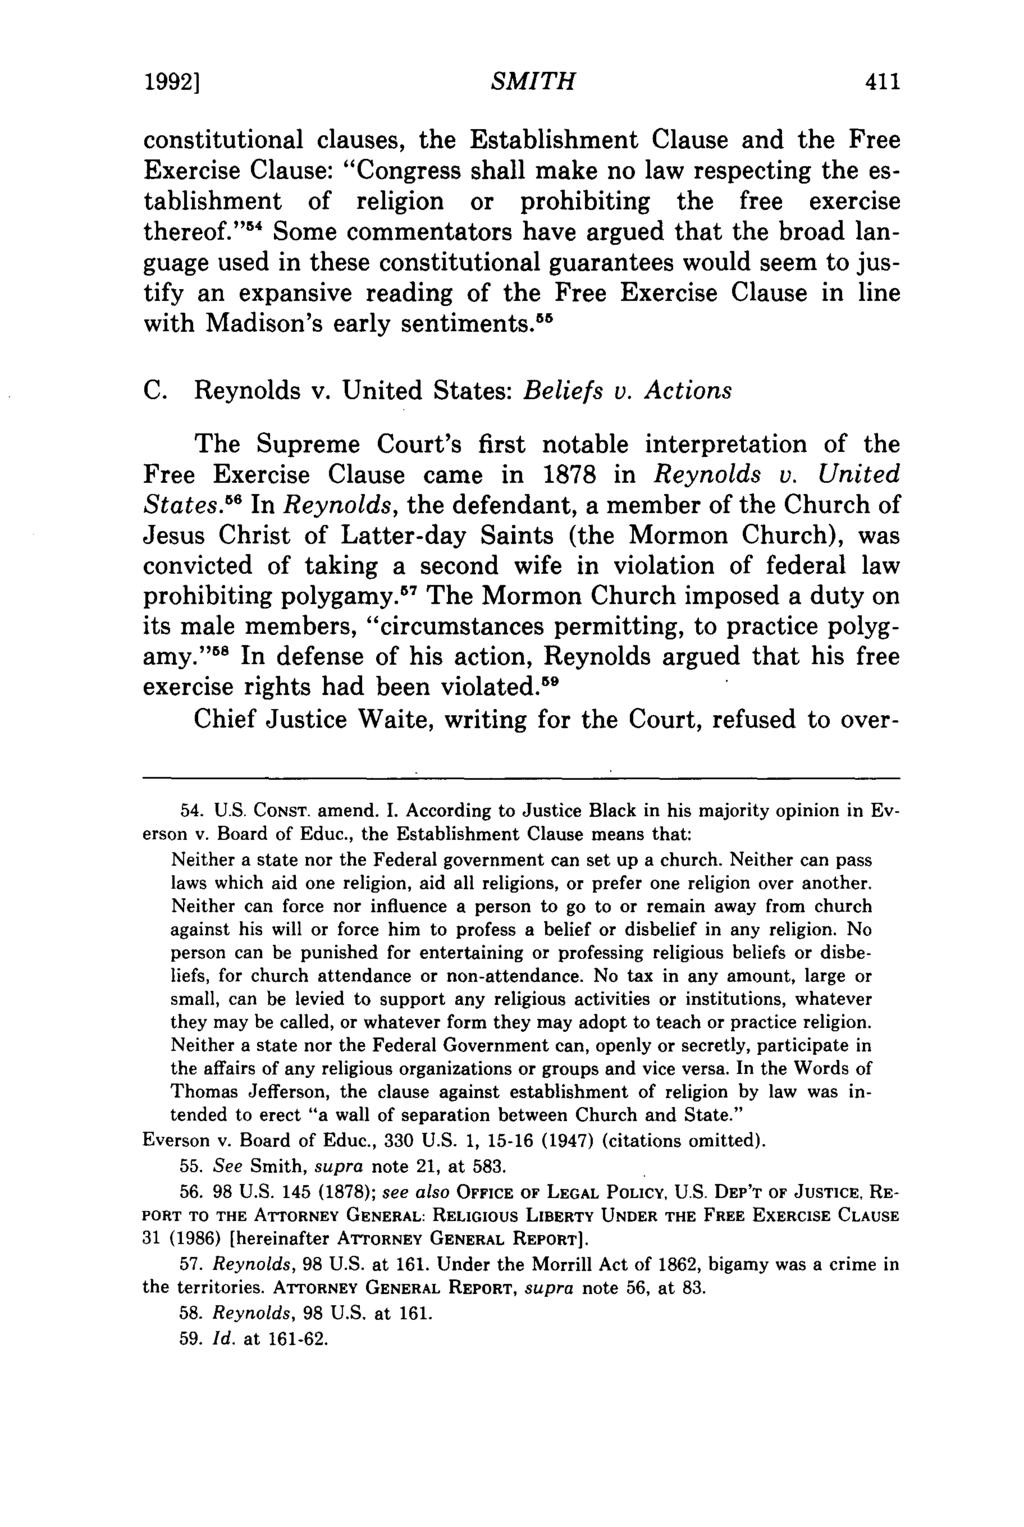 1992] SMITH constitutional clauses, the Establishment Clause and the Free Exercise Clause: "Congress shall make no law respecting the establishment of religion or prohibiting the free exercise